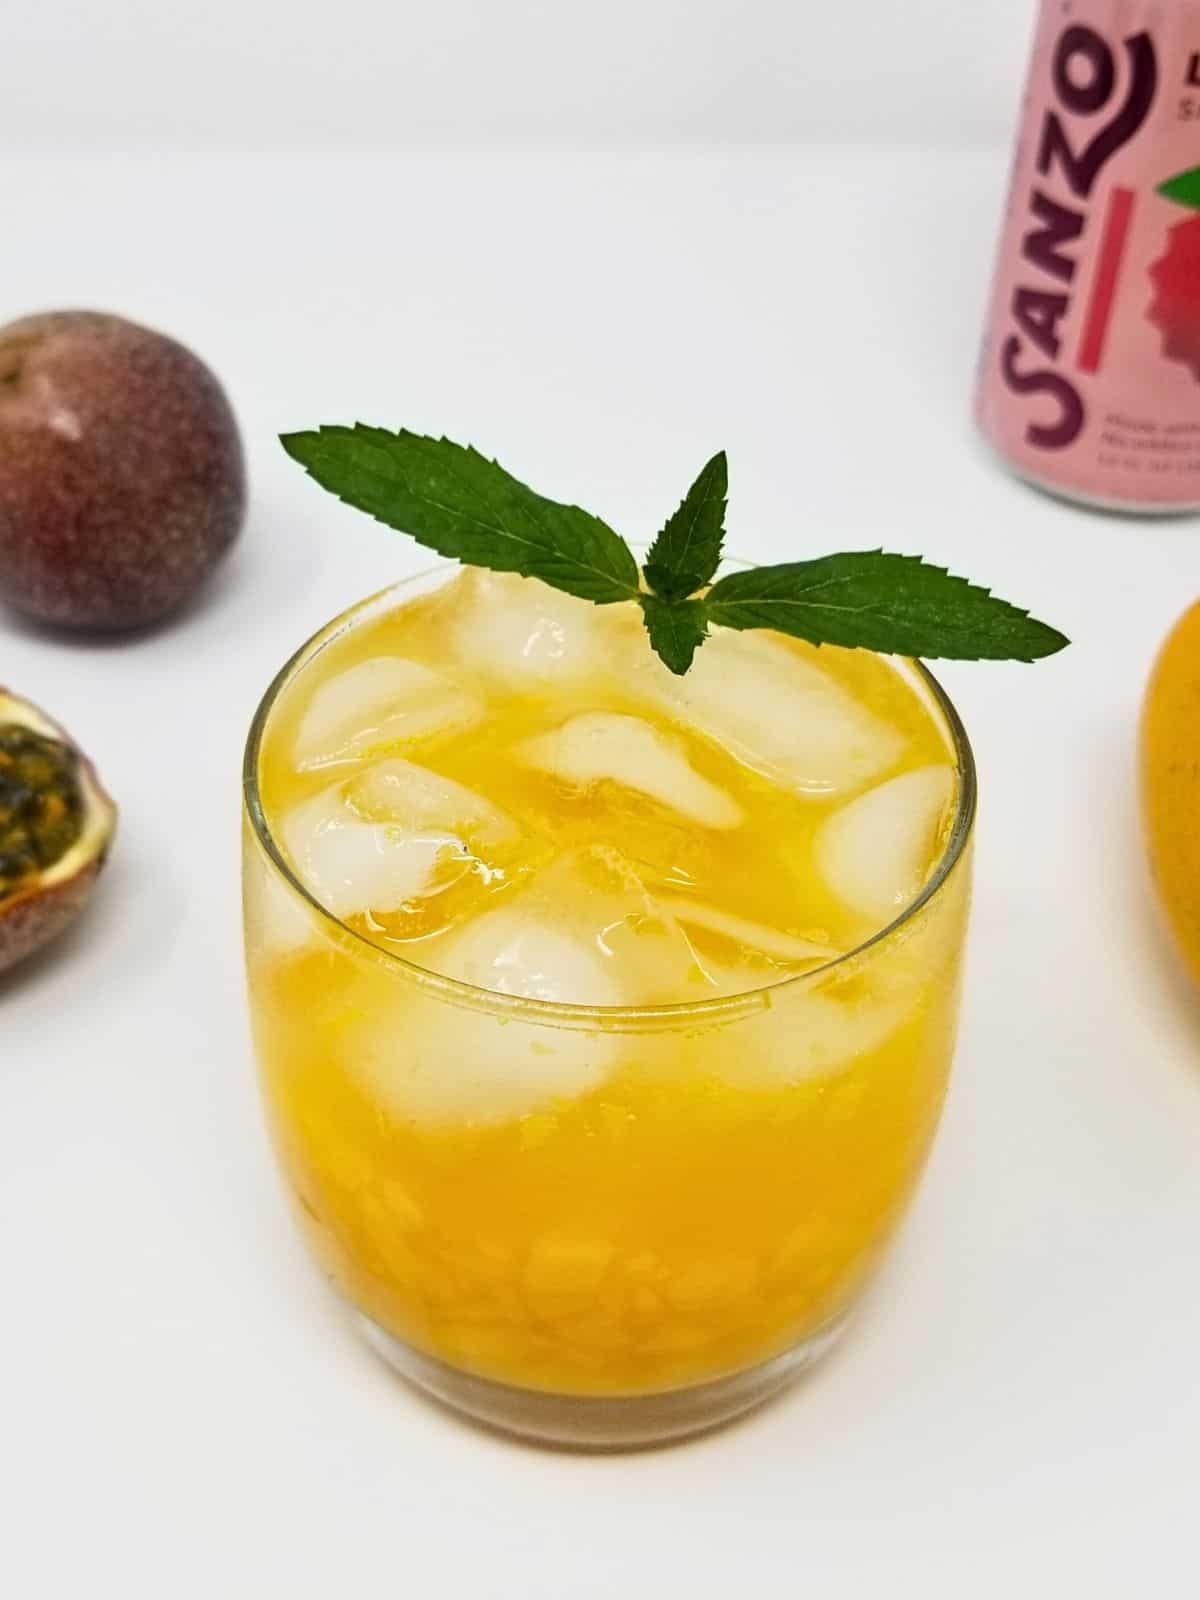 mango passion fruit mocktail on a drinking glass served with ice.